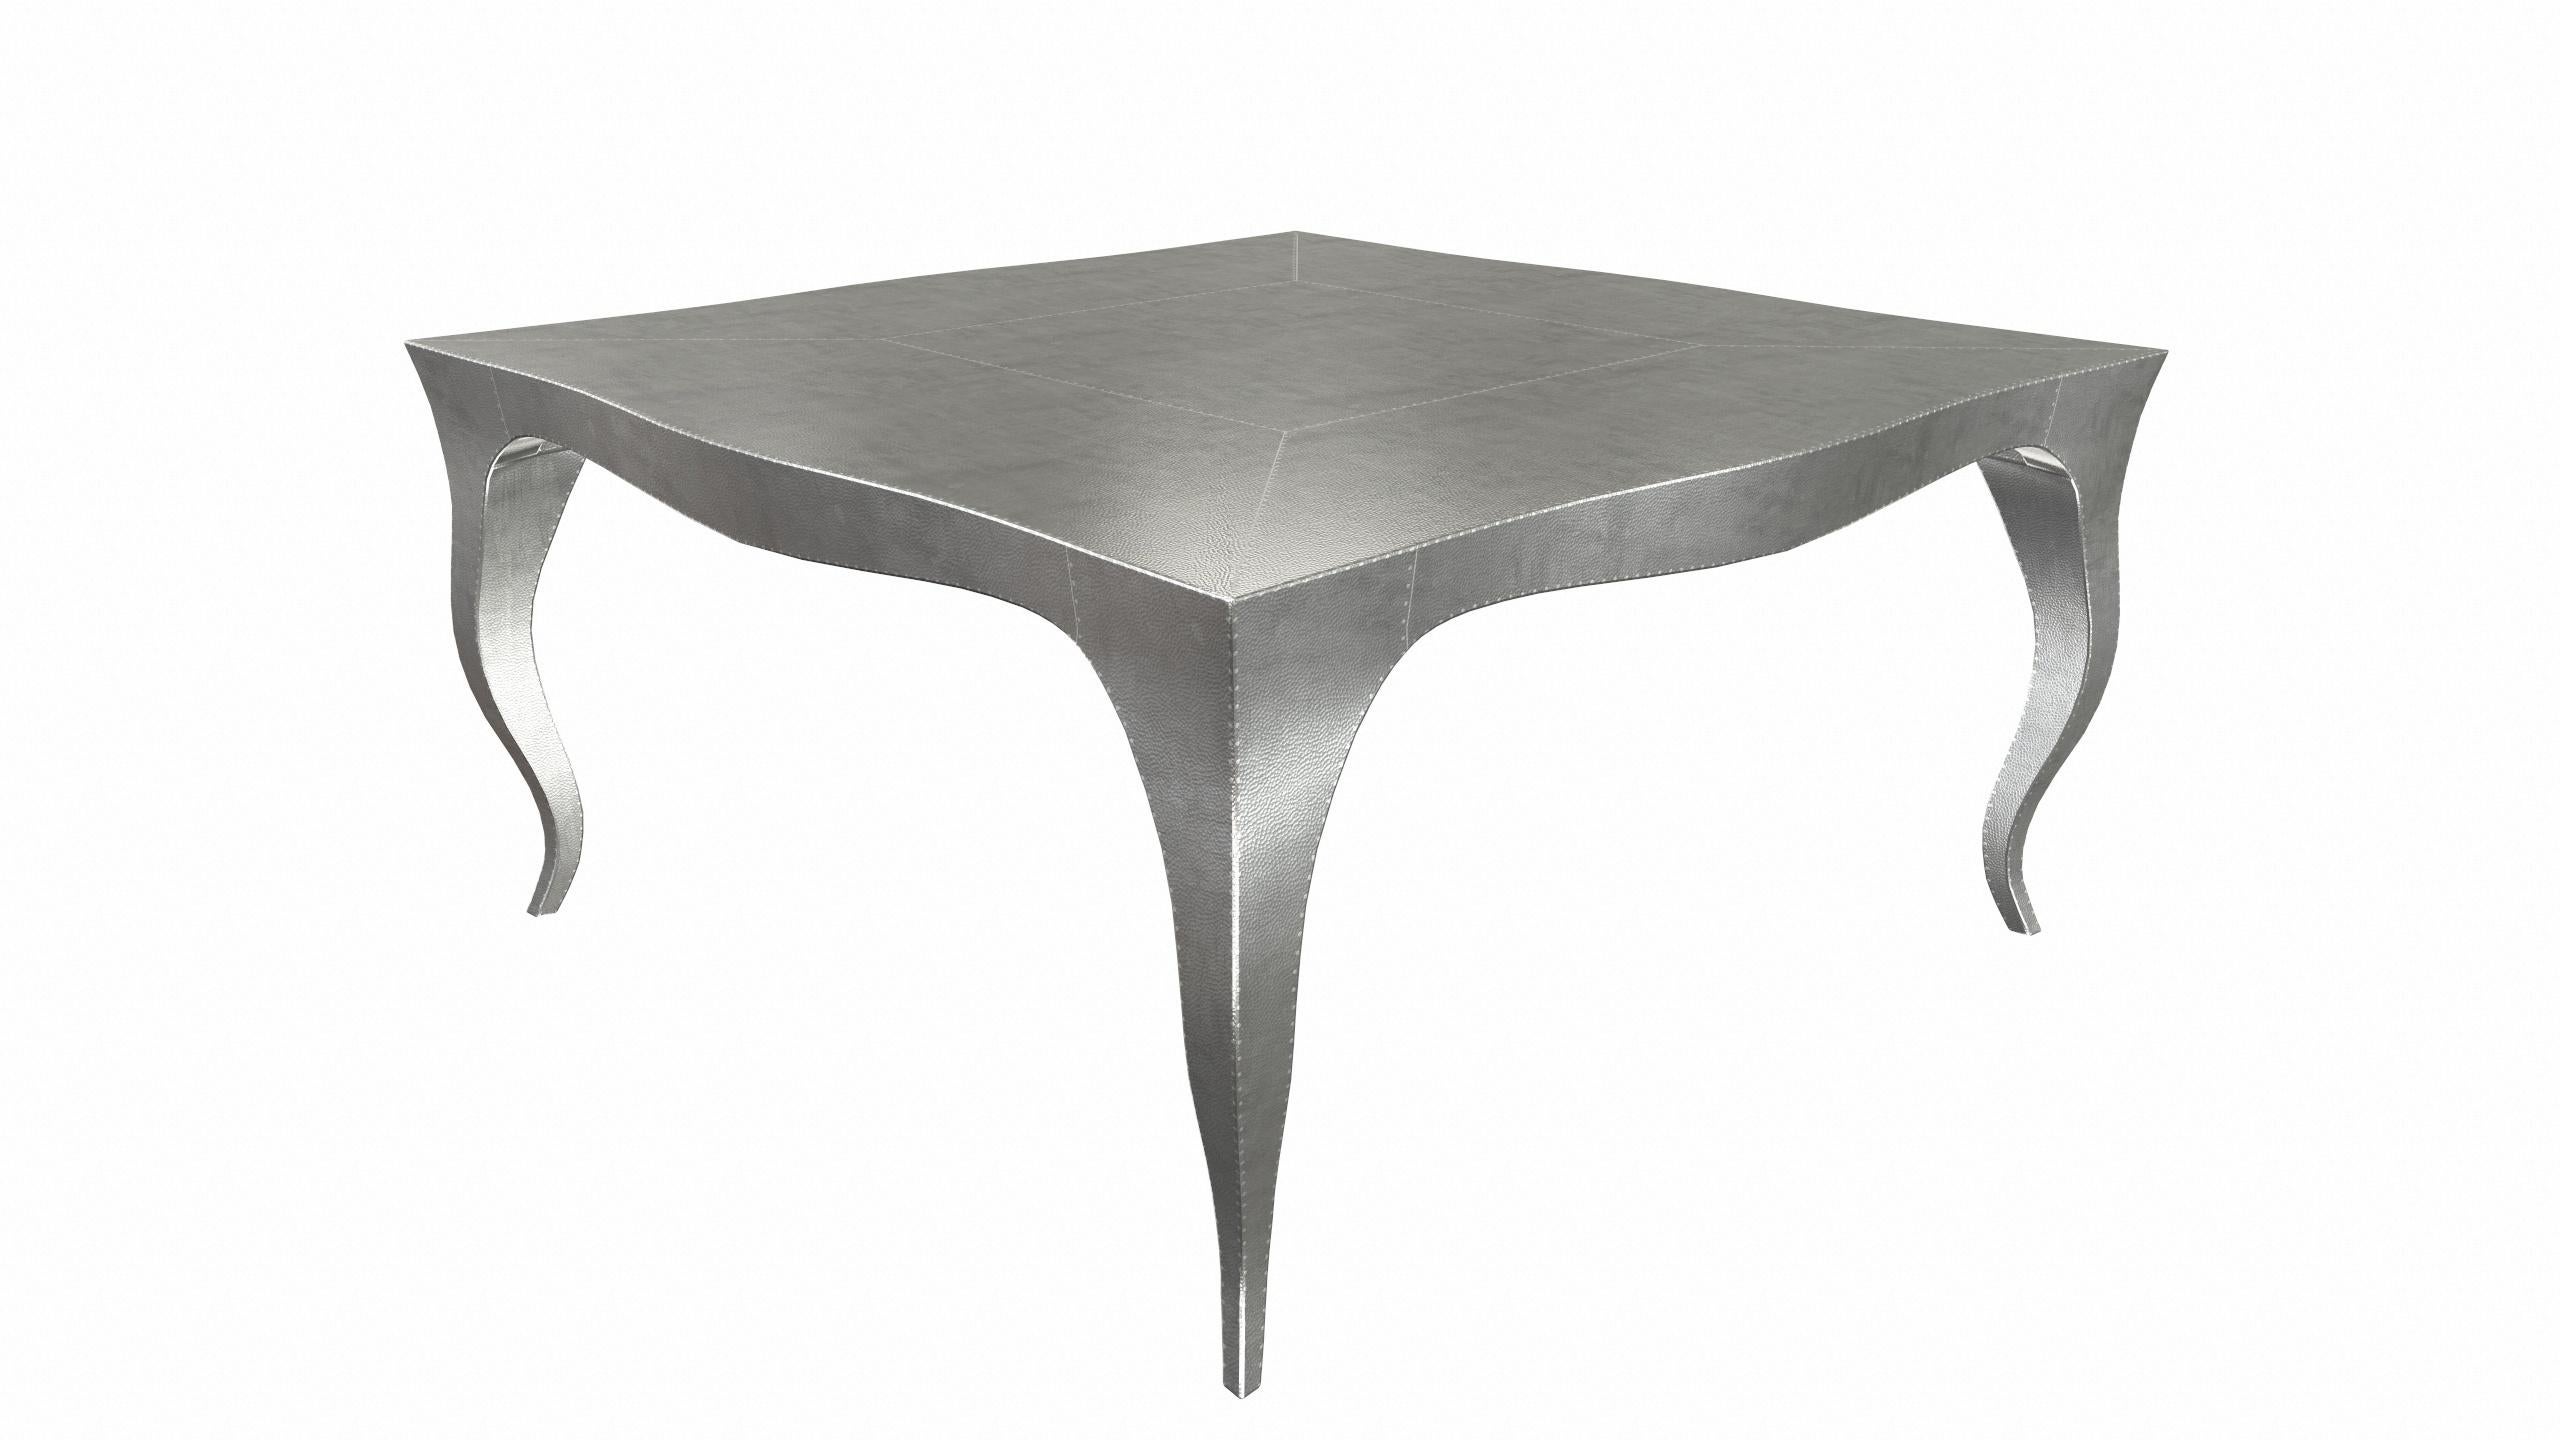 American Louise Art Deco Center Tables Mid. Hammered White Bronze 18.5x18.5x10 inch  For Sale